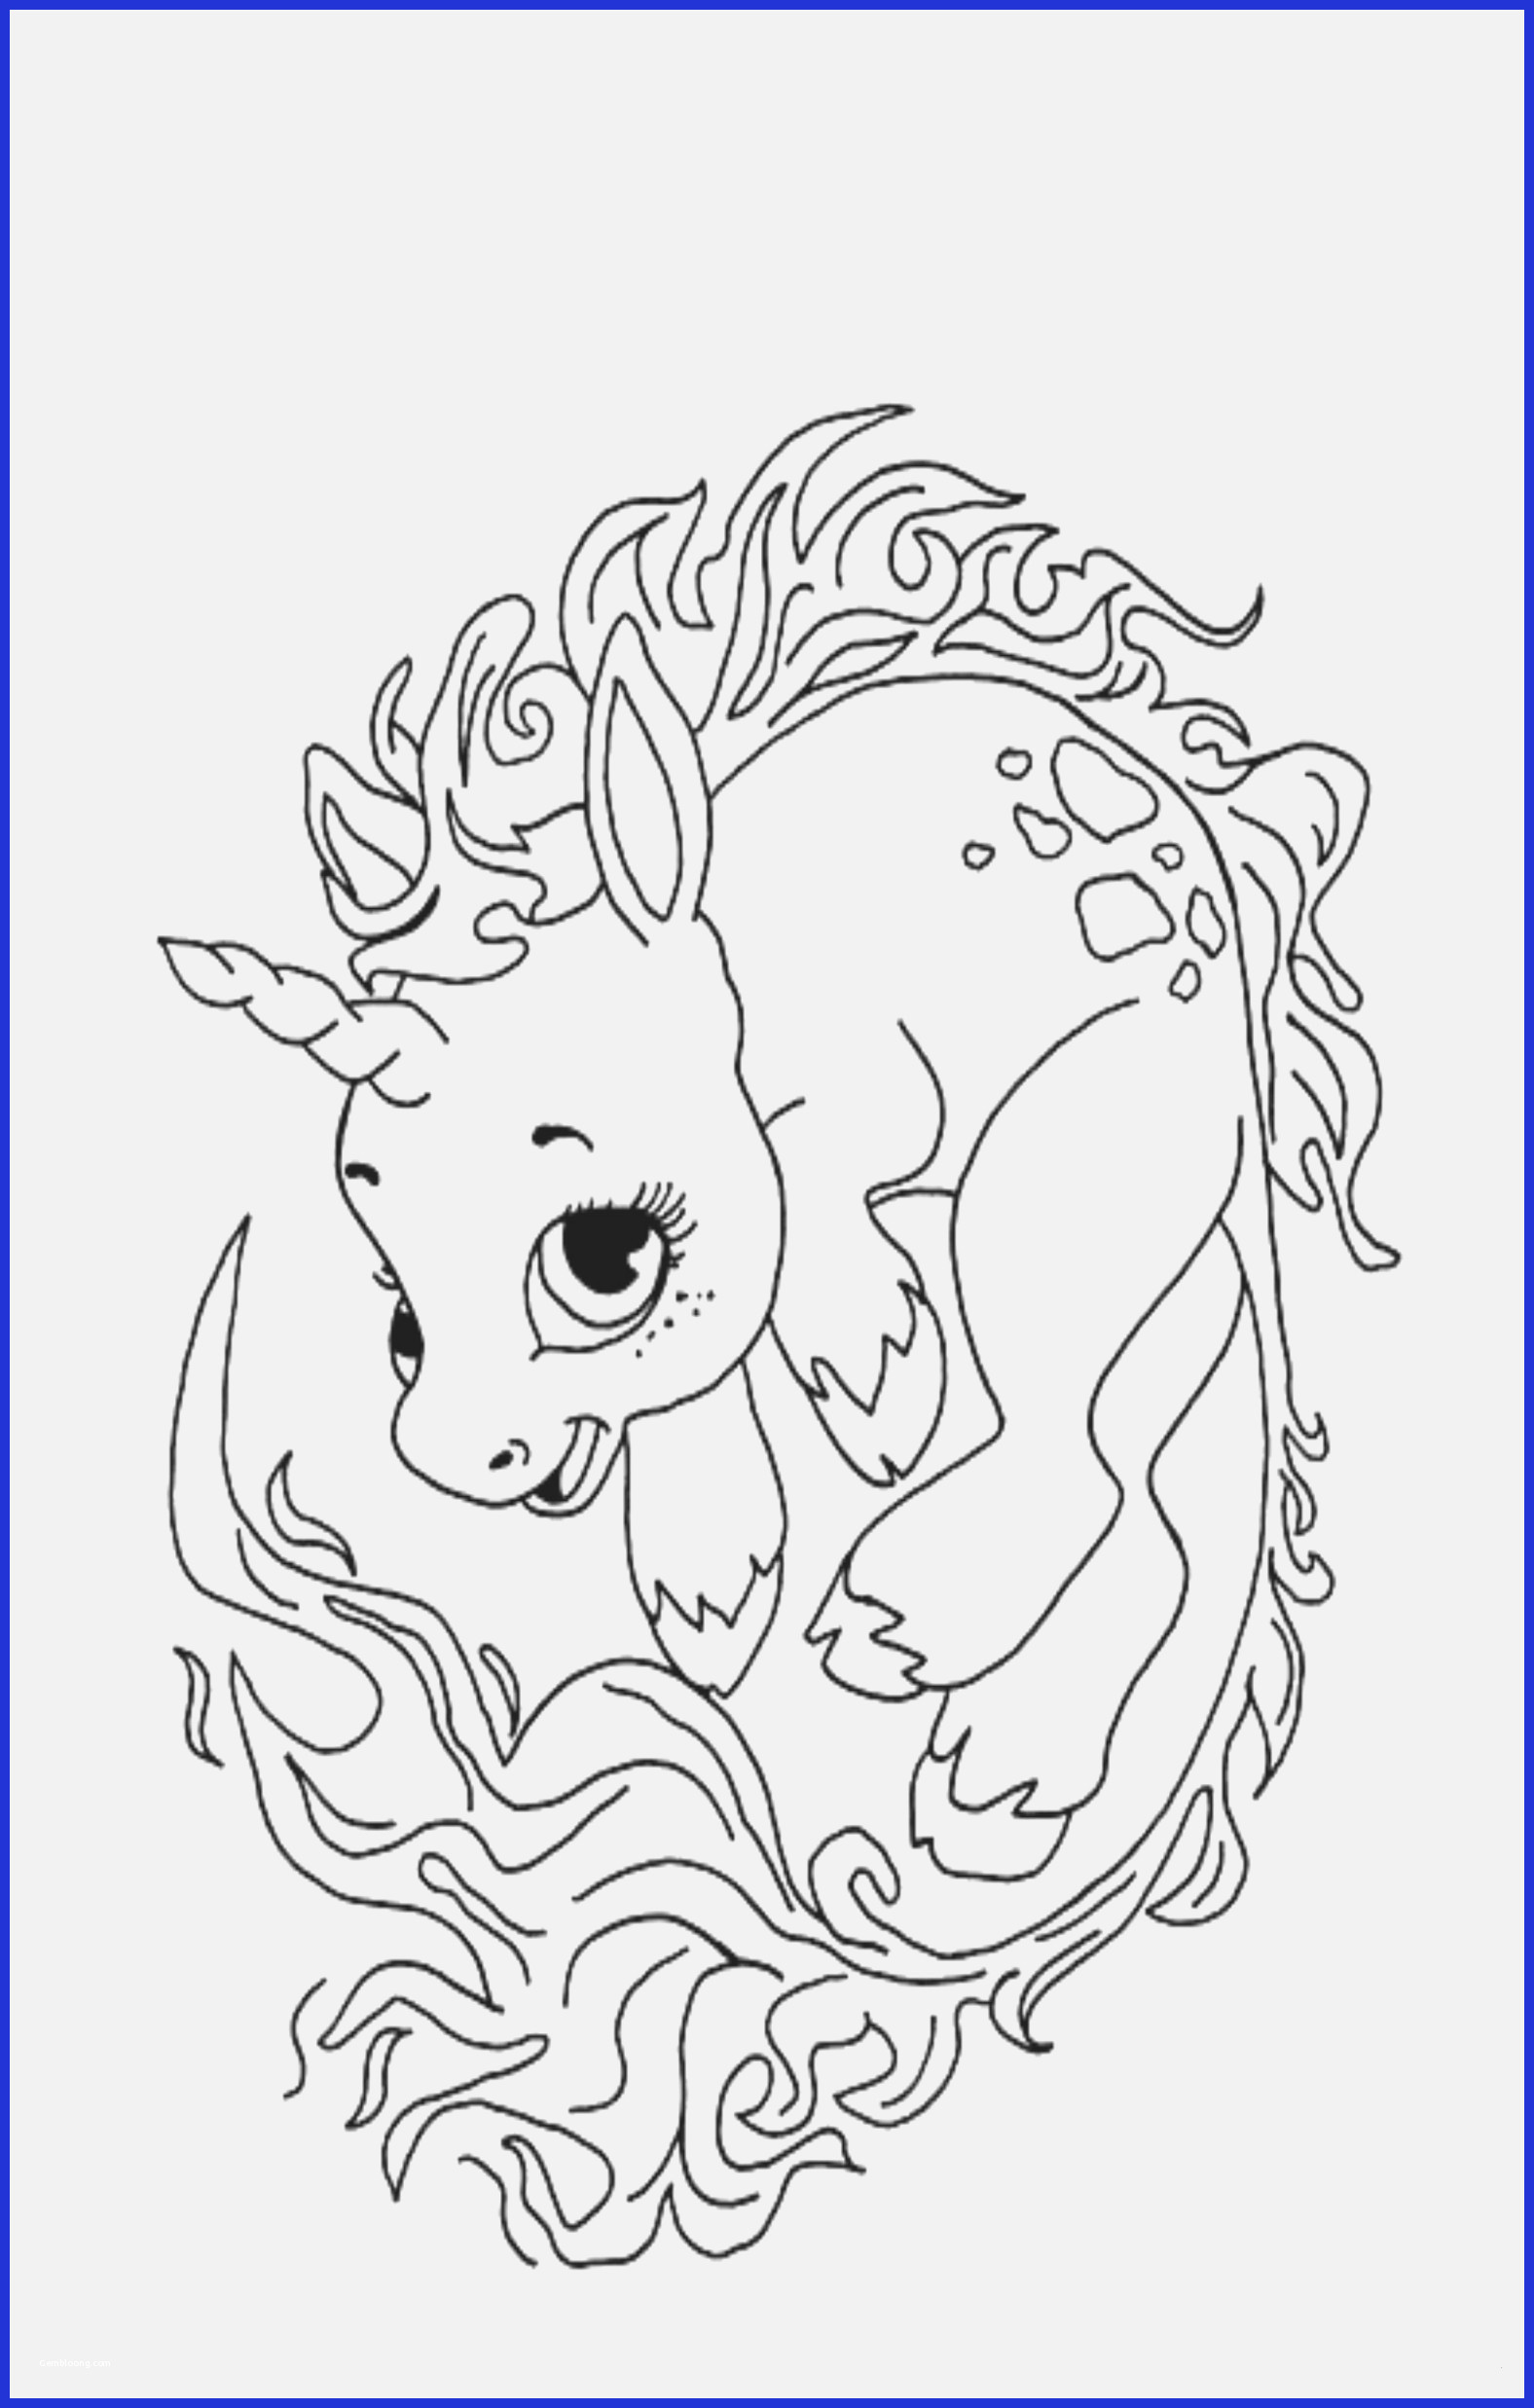 coloring pages : Animal Coloring Pages For Adults Beautiful 25 Luxury  Graphy Coloring Page Animals For Adults Animal Coloring Pages for Adults ~  affiliateprogrambook.com